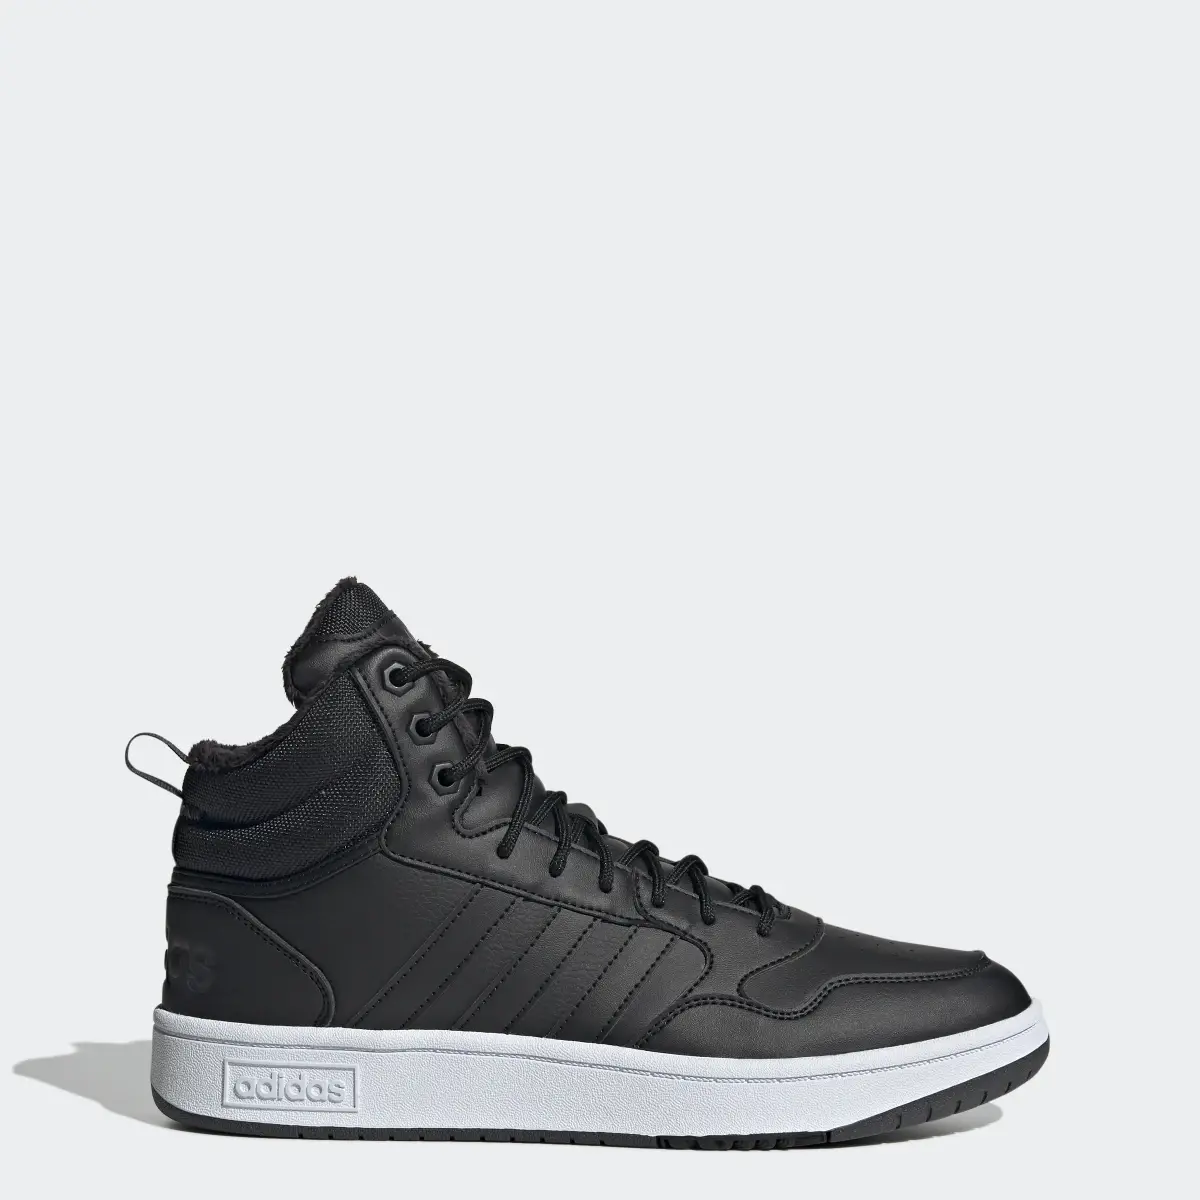 Adidas Hoops 3.0 Mid Lifestyle Basketball Classic Fur Lining Winterized Schuh. 1